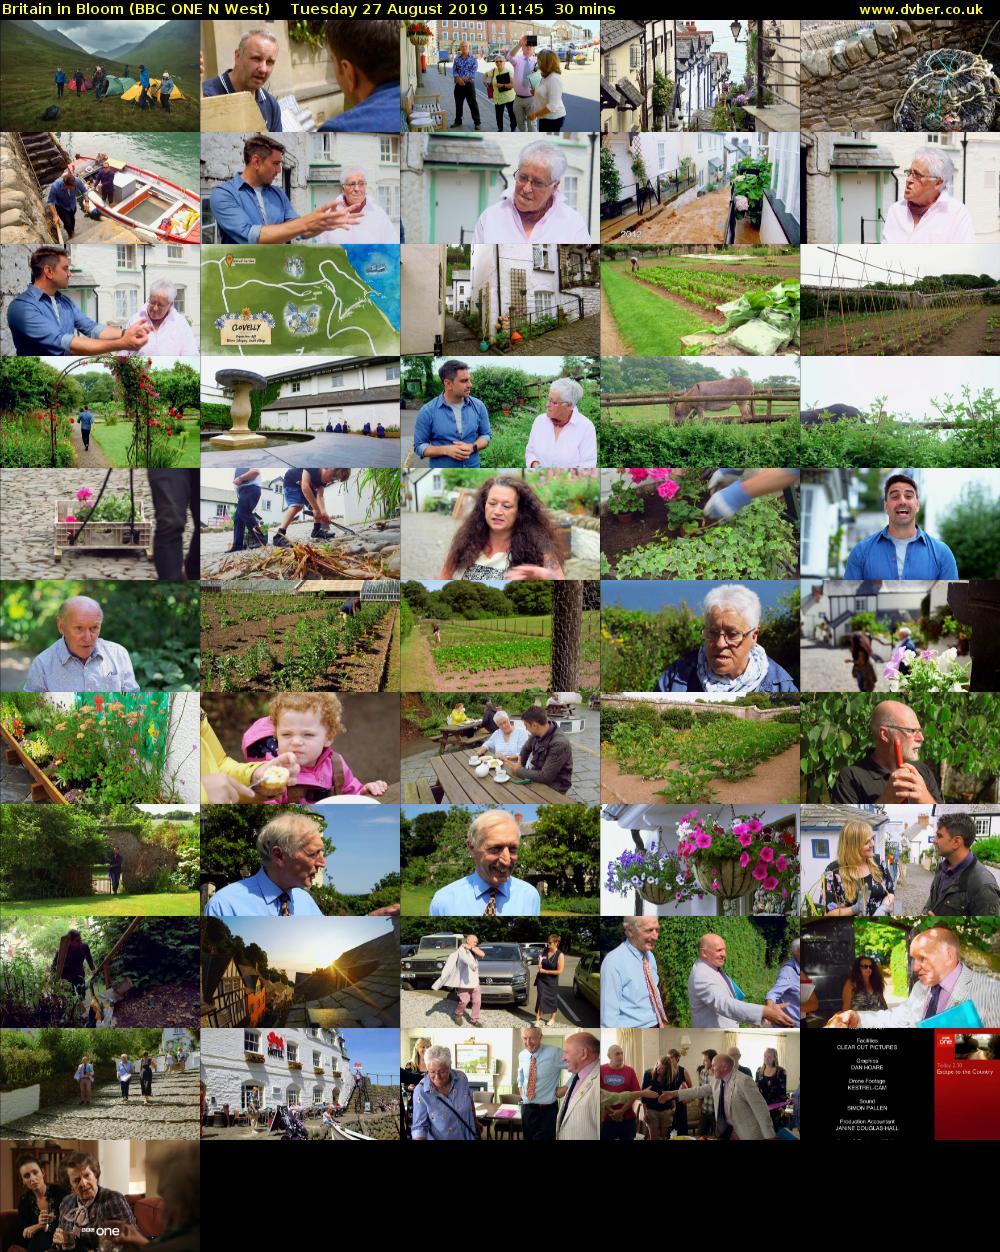 Britain in Bloom (BBC ONE N West) Tuesday 27 August 2019 11:45 - 12:15